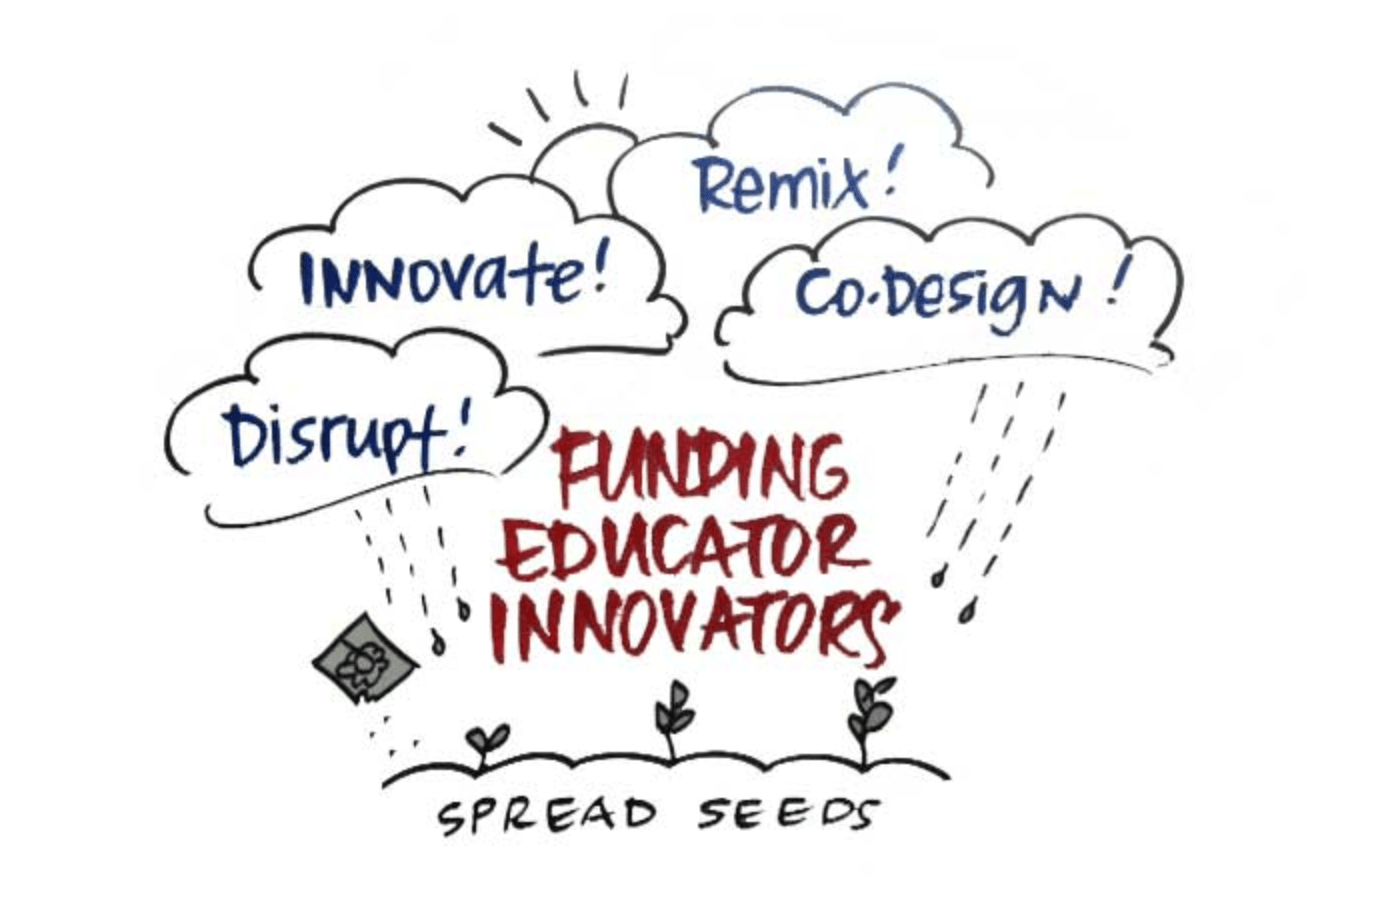 Innovation Hour gets a big boost from Educator Innovator